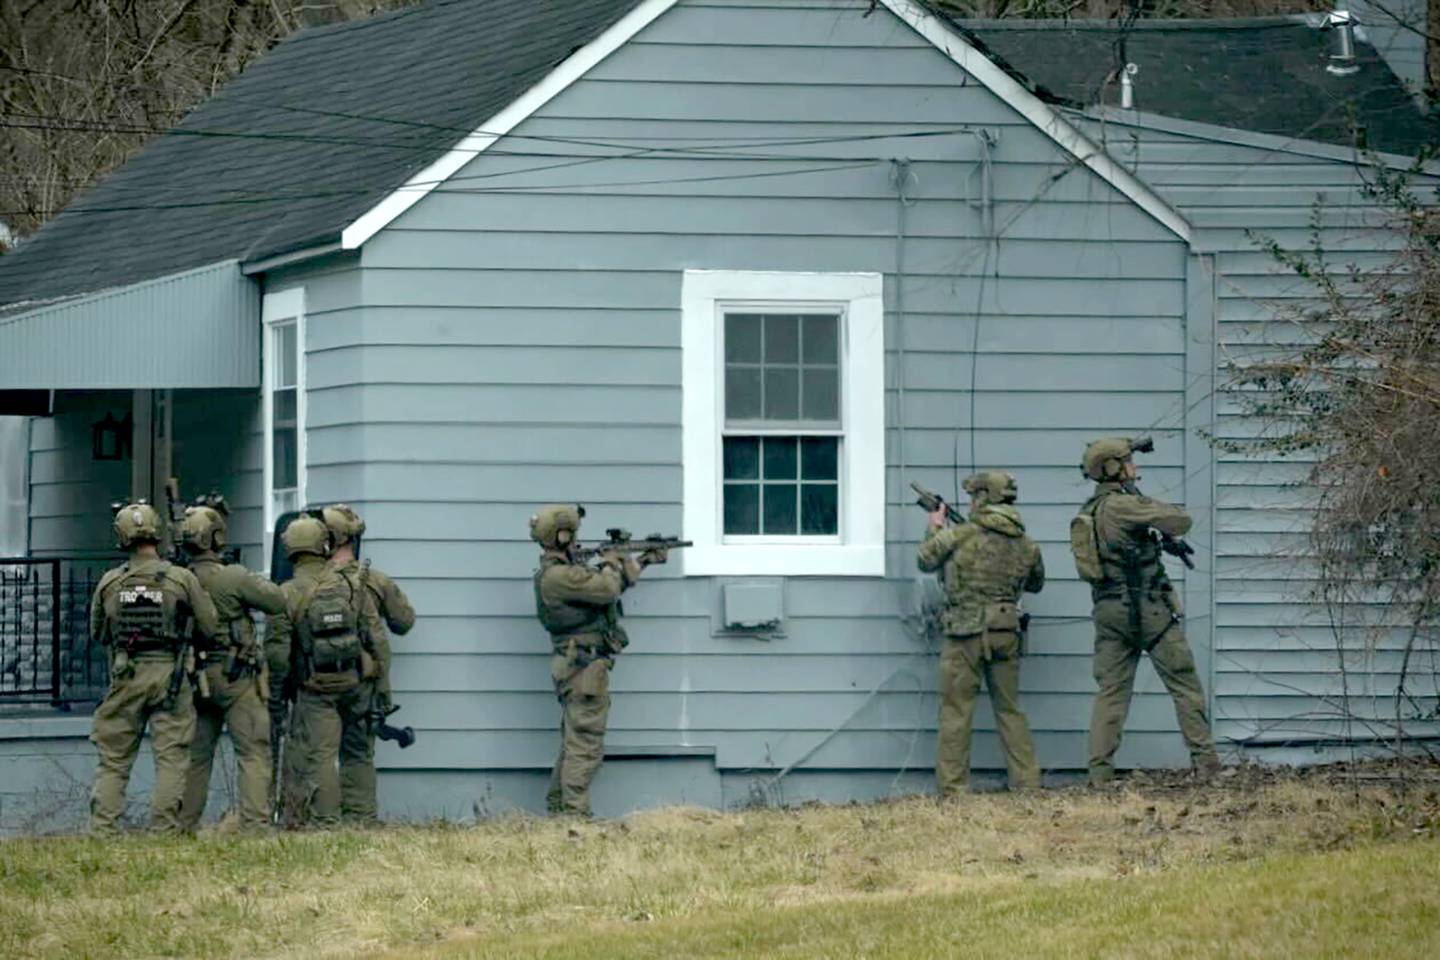 A SWAT team investigates a house on Warren Rd near Loch Raven Reservoir during a manhunt for 24-year-old Cockeysville resident David Emory Linthicum.